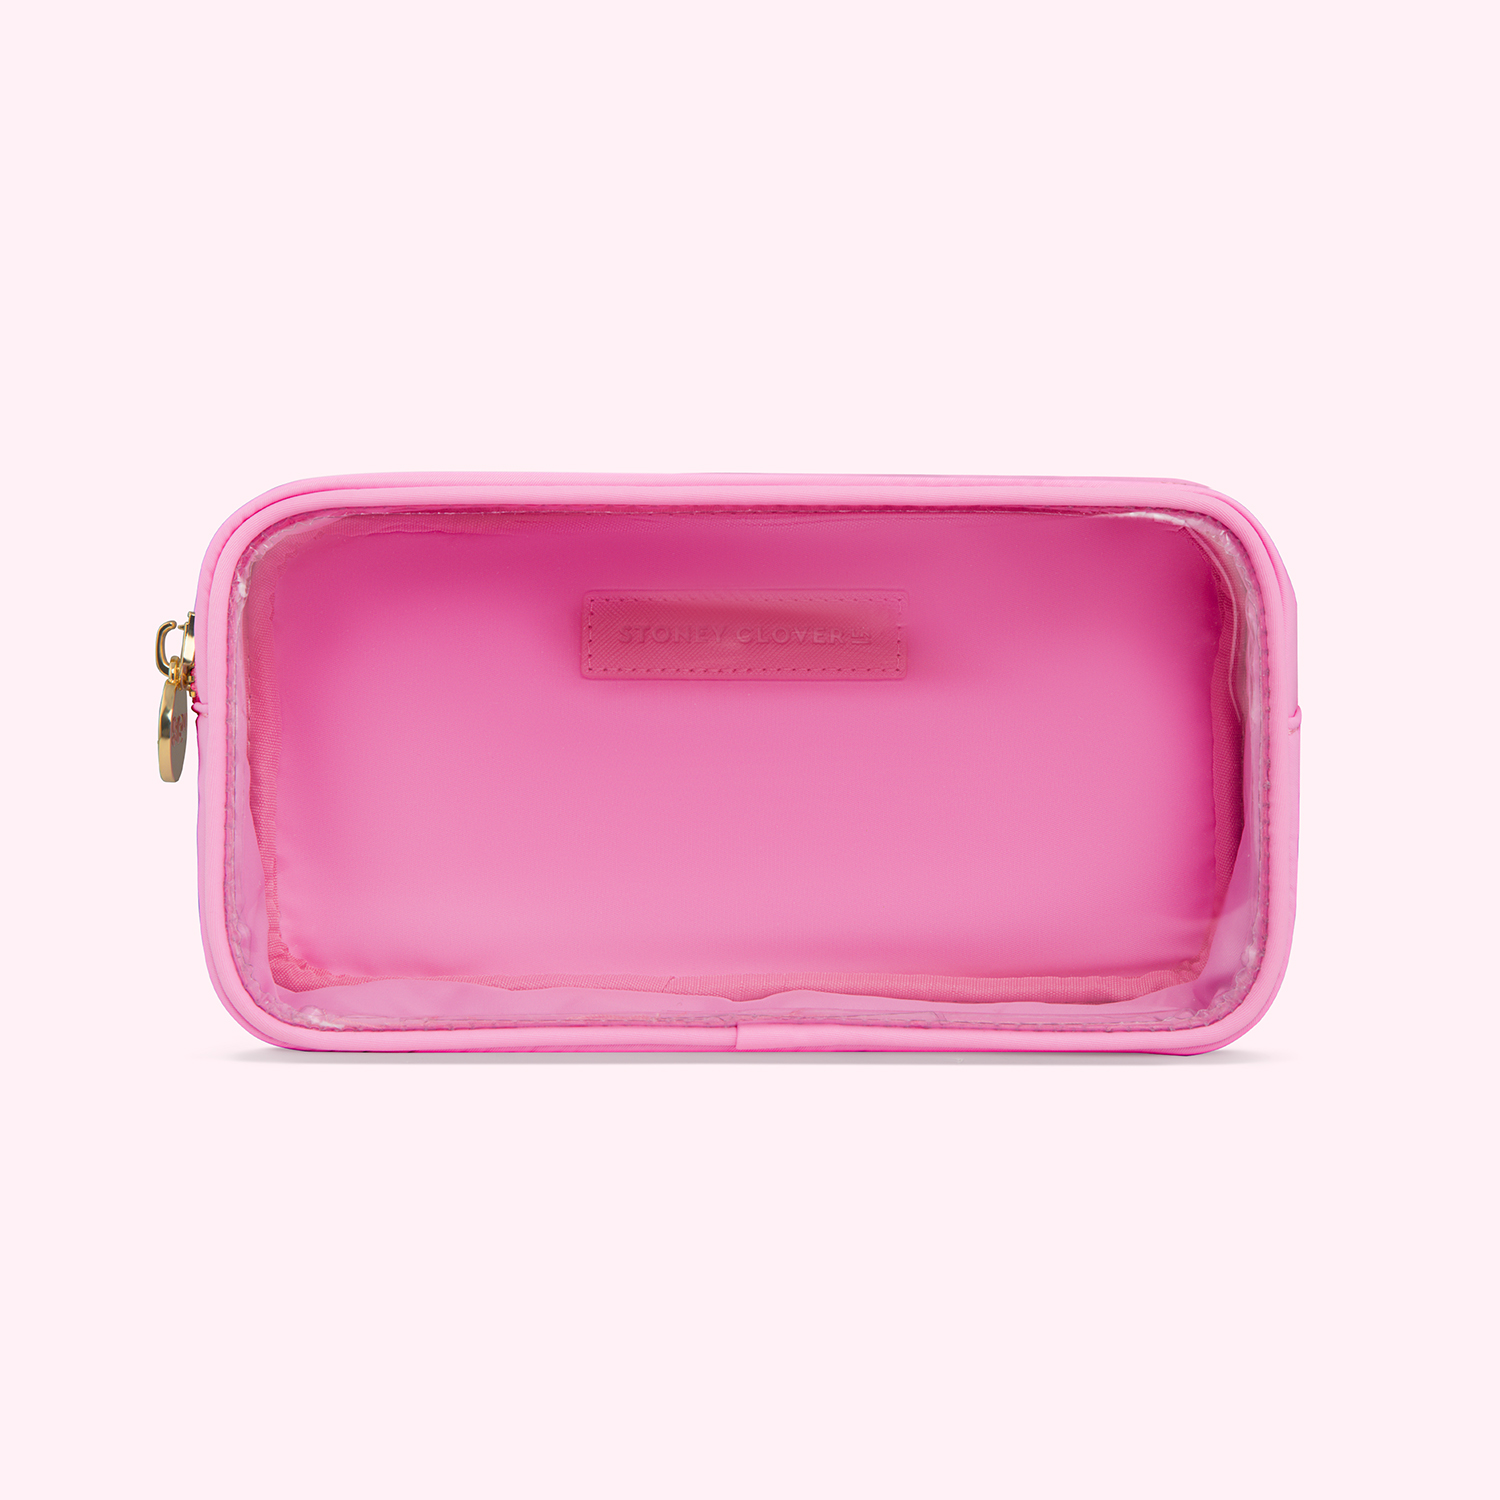 Makeup Clear Front Large Pouch